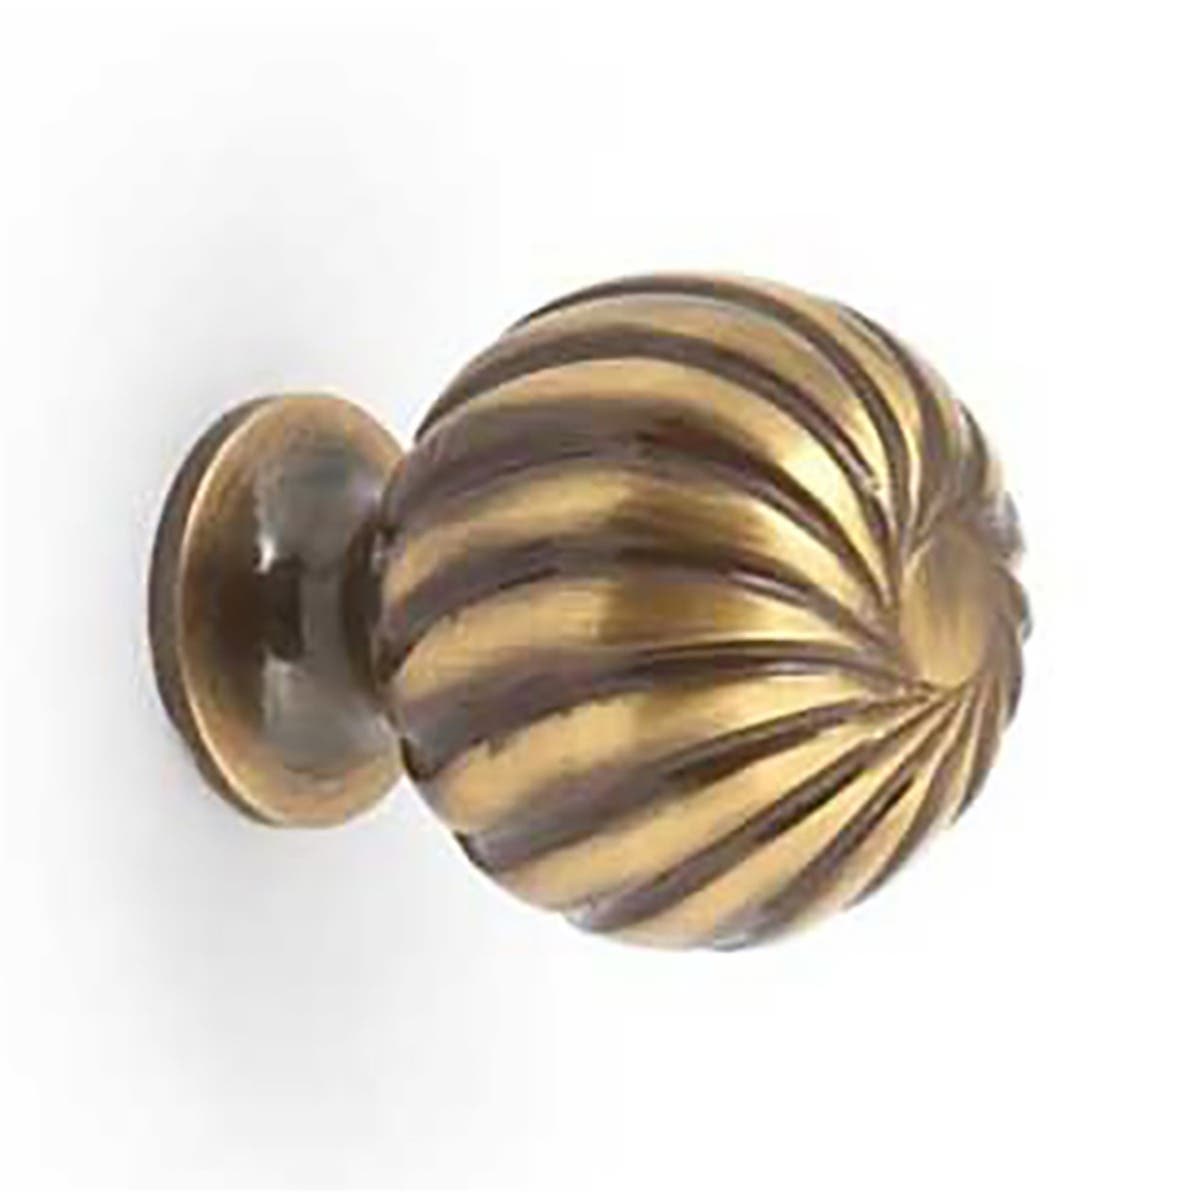 INDIA MADE BRASS CERAMIC DOOR KNOBS DRAWER PULL CABINET CHOCOLATE BROWN 